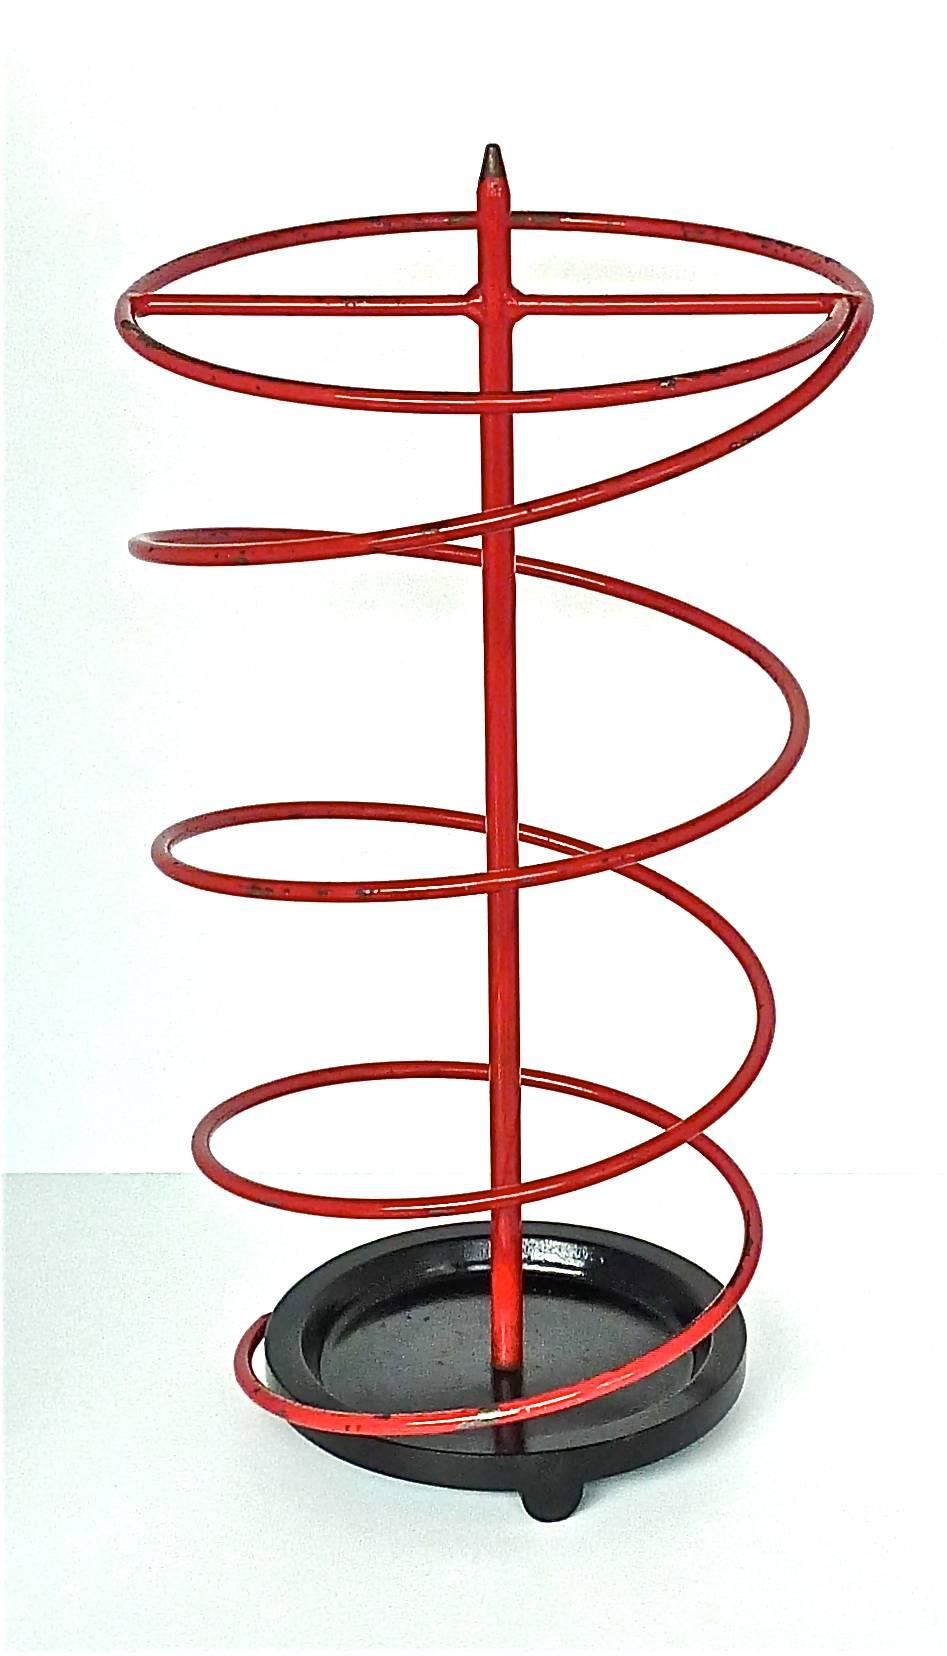 Rare French Modernist Umbrella Stand Red Black Iron Spiral Royere Style 1930s For Sale 3